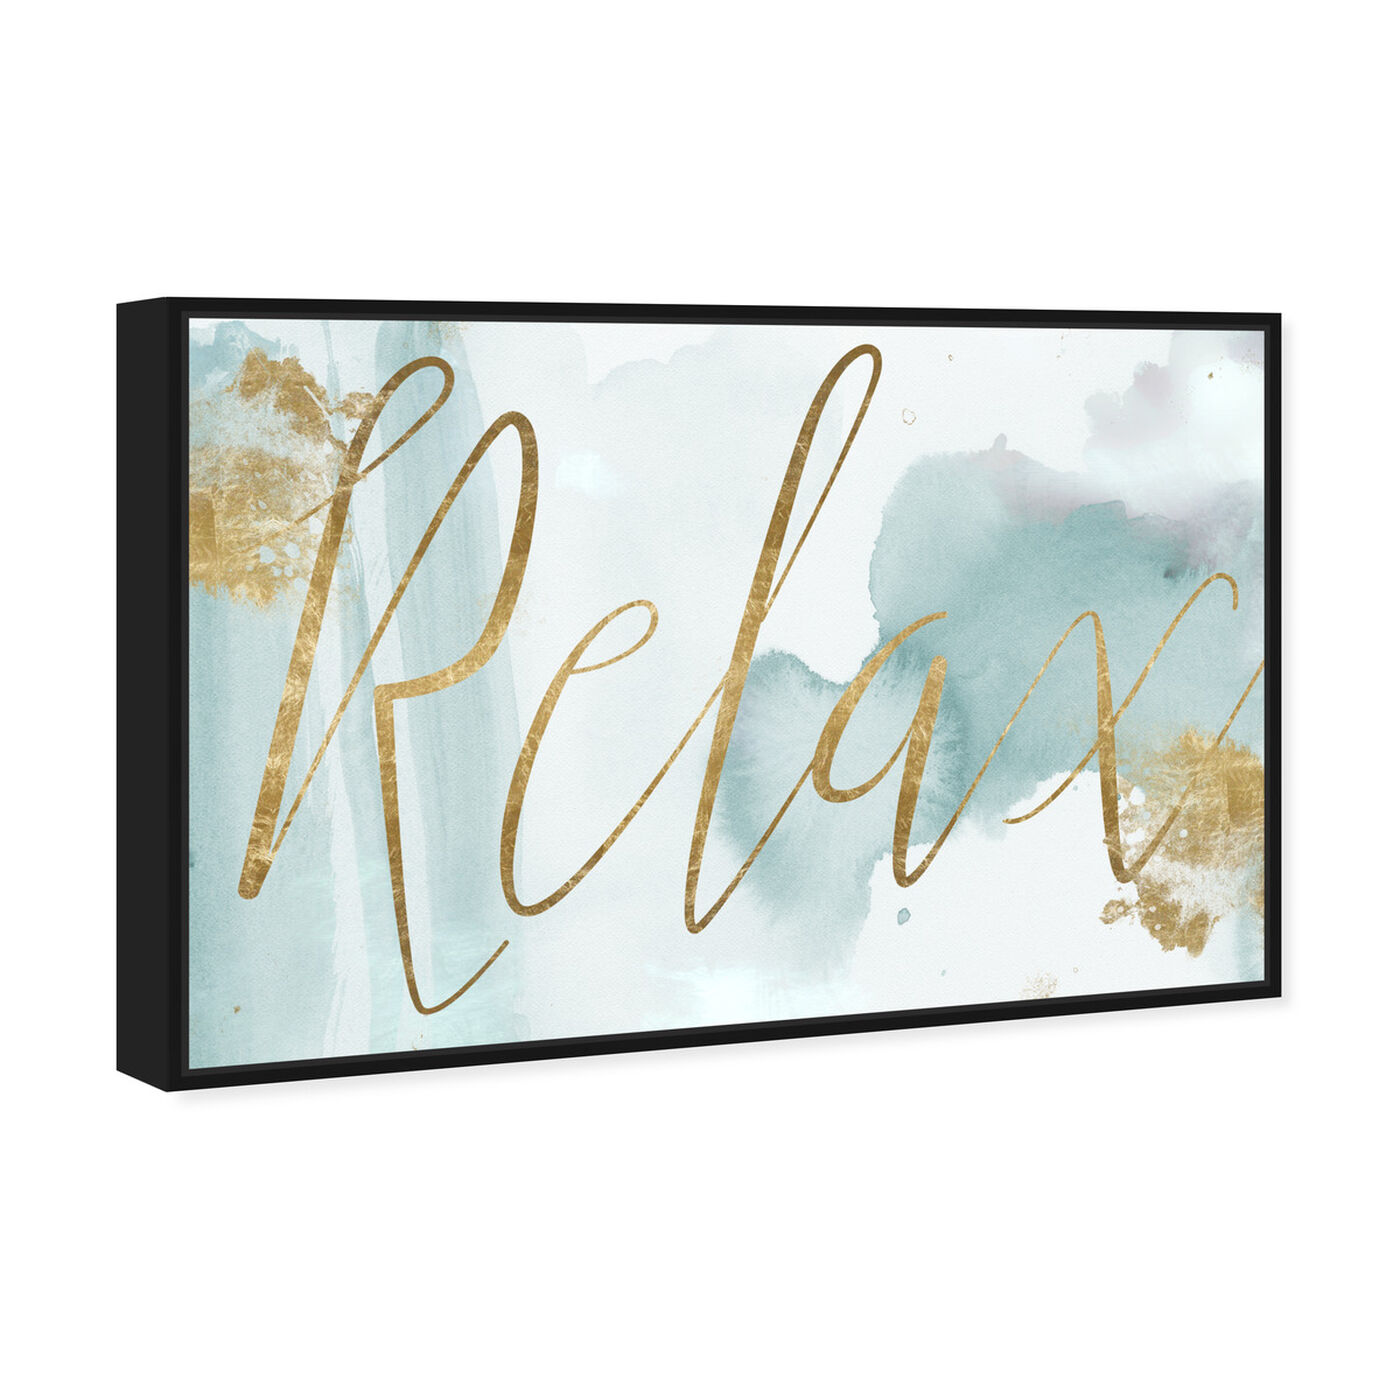 Angled view of Relax Gold featuring typography and quotes and motivational quotes and sayings art.